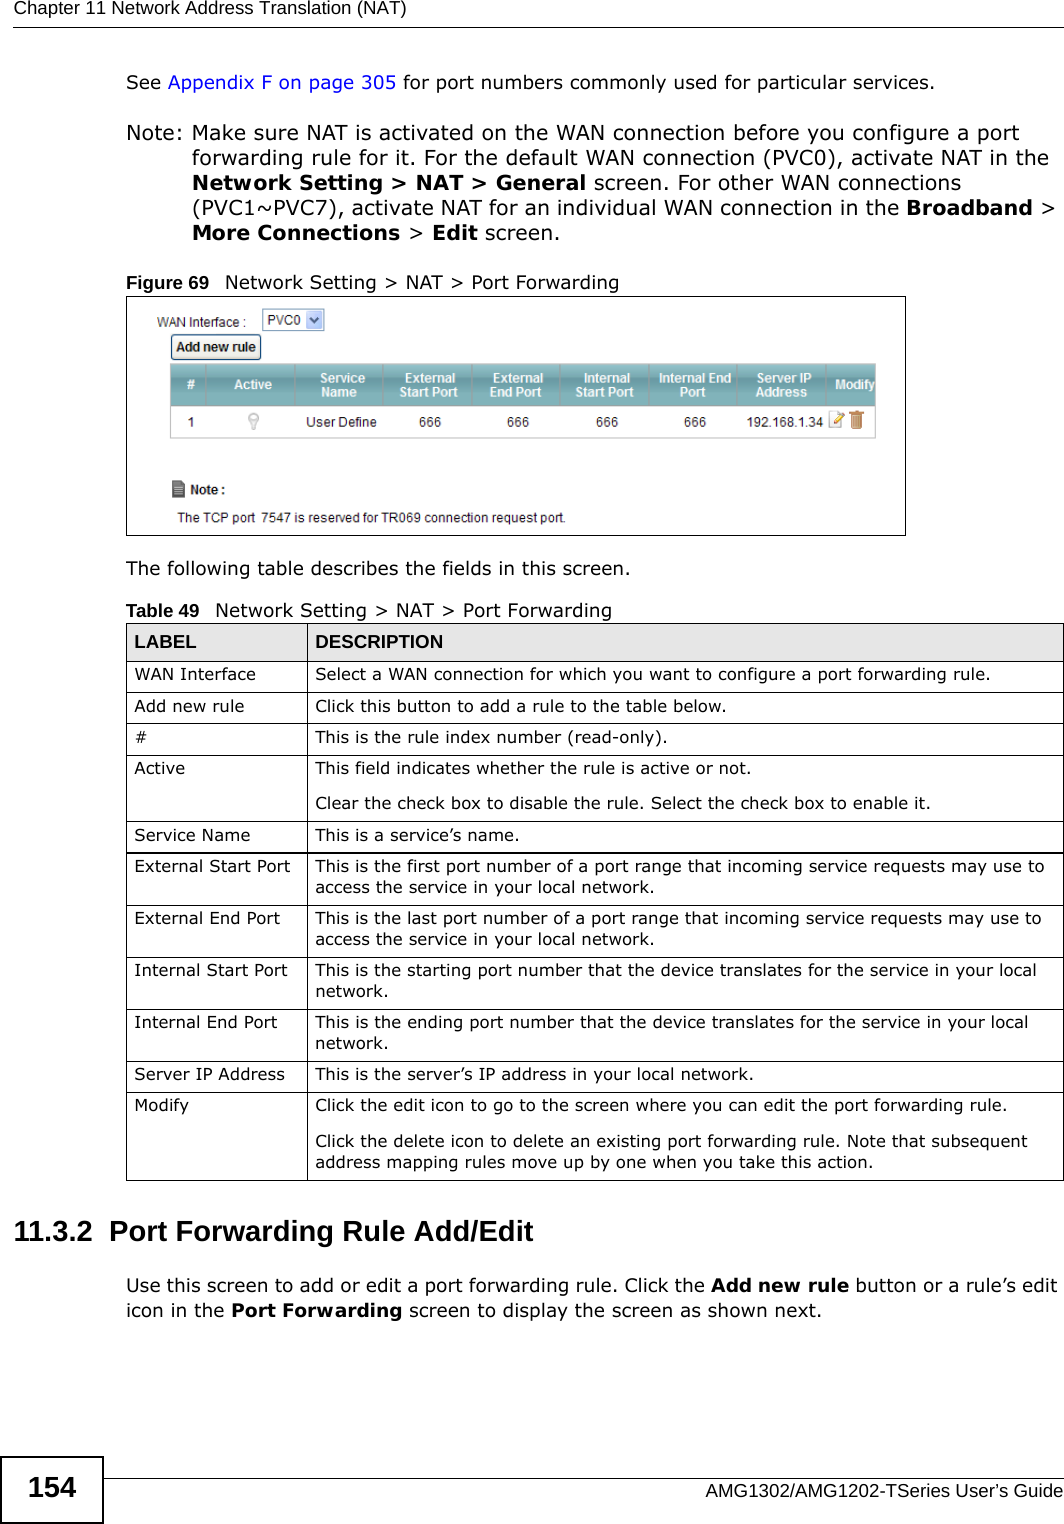 Chapter 11 Network Address Translation (NAT)AMG1302/AMG1202-TSeries User’s Guide154See Appendix F on page 305 for port numbers commonly used for particular services.Note: Make sure NAT is activated on the WAN connection before you configure a port forwarding rule for it. For the default WAN connection (PVC0), activate NAT in the Network Setting &gt; NAT &gt; General screen. For other WAN connections (PVC1~PVC7), activate NAT for an individual WAN connection in the Broadband &gt; More Connections &gt; Edit screen.Figure 69   Network Setting &gt; NAT &gt; Port ForwardingThe following table describes the fields in this screen.11.3.2  Port Forwarding Rule Add/EditUse this screen to add or edit a port forwarding rule. Click the Add new rule button or a rule’s edit icon in the Port Forwarding screen to display the screen as shown next.Table 49   Network Setting &gt; NAT &gt; Port ForwardingLABEL DESCRIPTIONWAN Interface Select a WAN connection for which you want to configure a port forwarding rule.Add new rule Click this button to add a rule to the table below.#This is the rule index number (read-only).Active This field indicates whether the rule is active or not.Clear the check box to disable the rule. Select the check box to enable it.Service Name This is a service’s name.External Start Port  This is the first port number of a port range that incoming service requests may use to access the service in your local network.External End Port  This is the last port number of a port range that incoming service requests may use to access the service in your local network.Internal Start Port This is the starting port number that the device translates for the service in your local network.Internal End Port This is the ending port number that the device translates for the service in your local network.Server IP Address This is the server’s IP address in your local network.Modify Click the edit icon to go to the screen where you can edit the port forwarding rule.Click the delete icon to delete an existing port forwarding rule. Note that subsequent address mapping rules move up by one when you take this action.